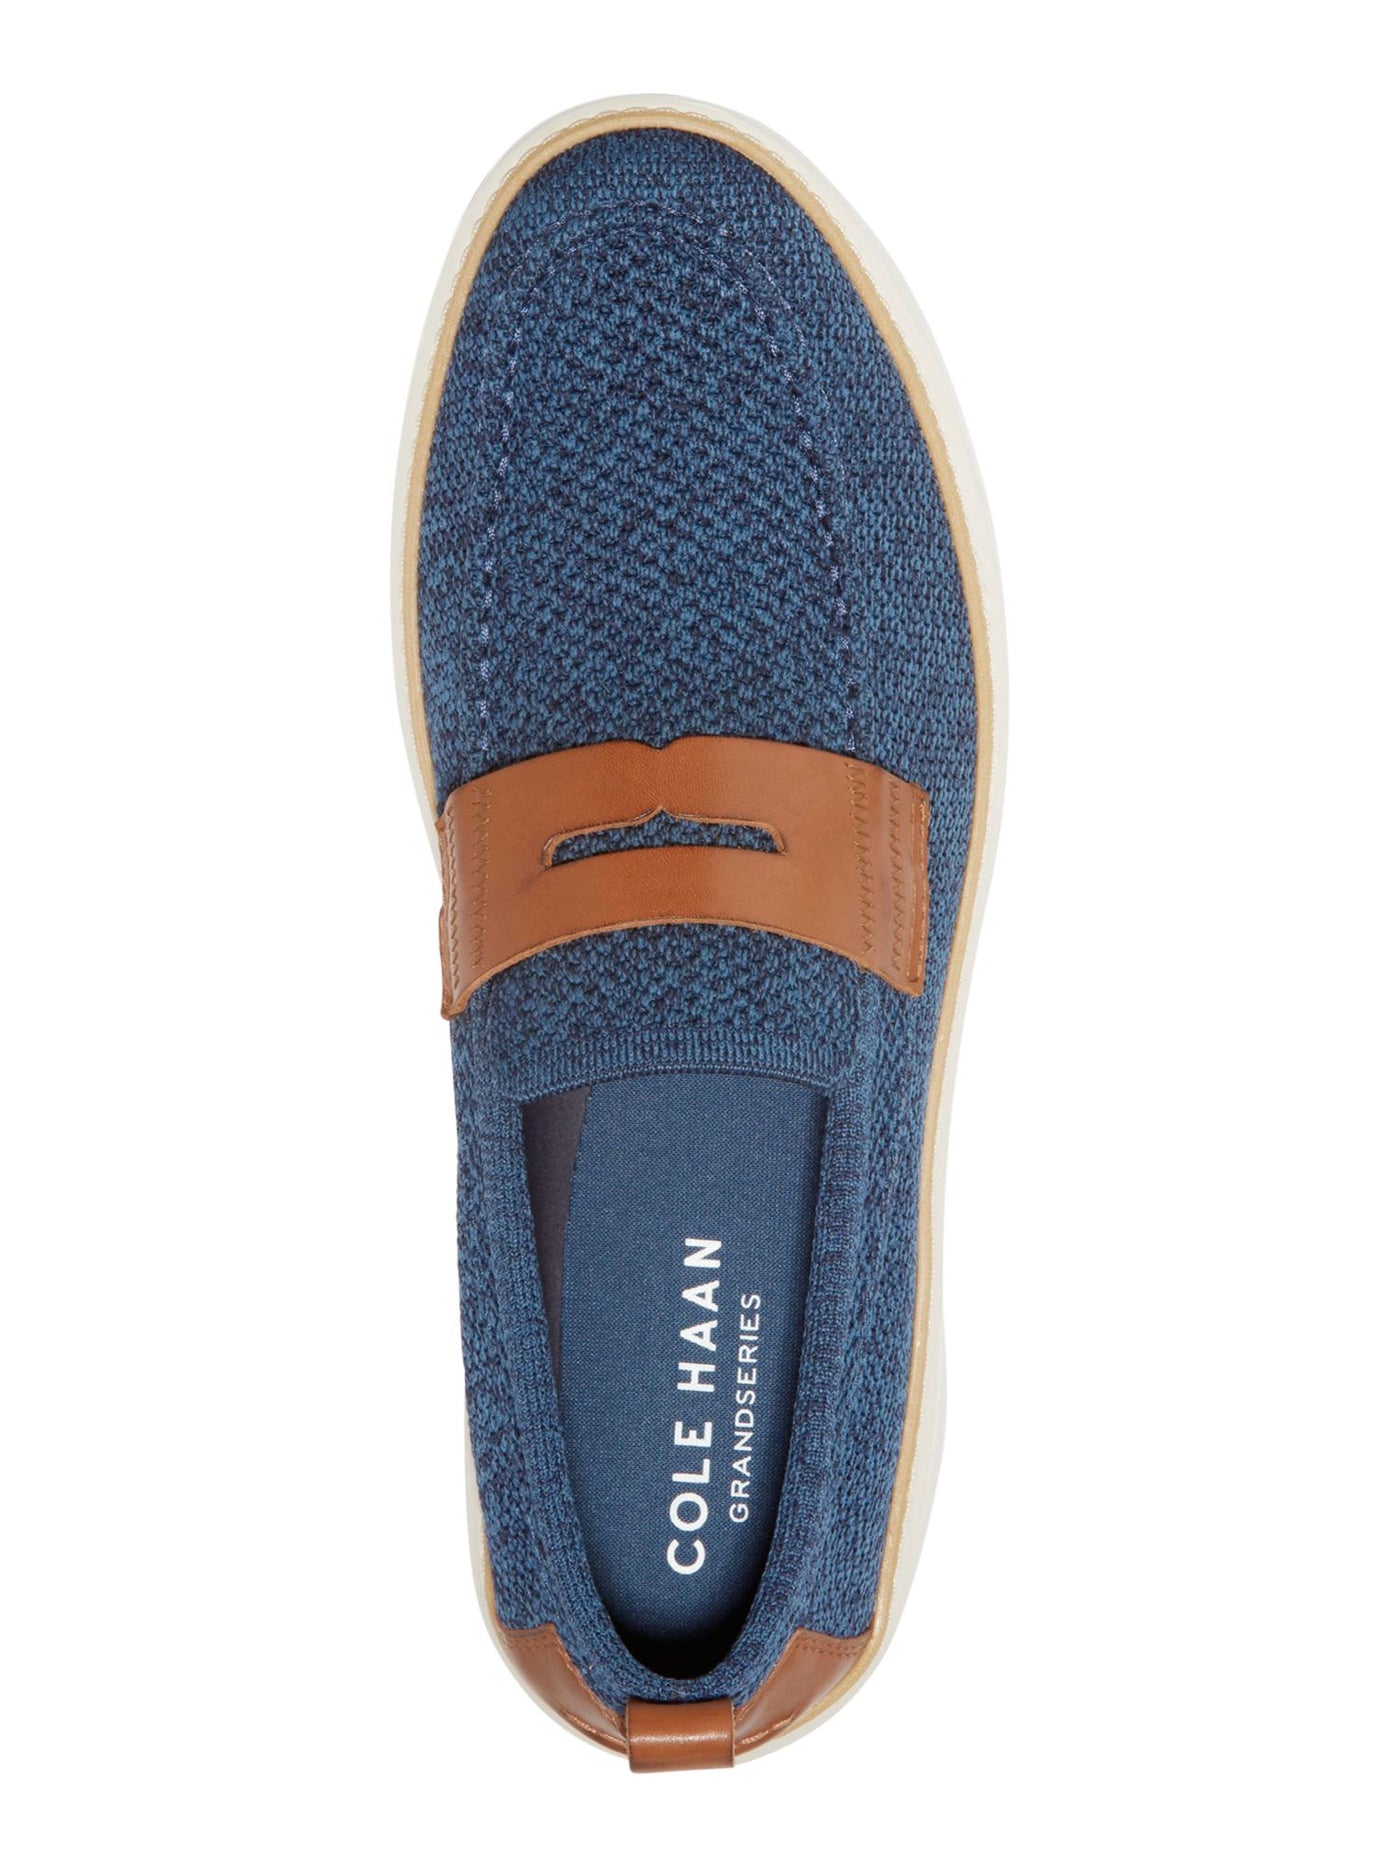 COLE HAAN GRANDSERIES Mens Blue Knit Contrast Penny Keeper Back Pull-Tab Cushioned Topspin Round Toe Wedge Slip On Loafers Shoes 11.5 M